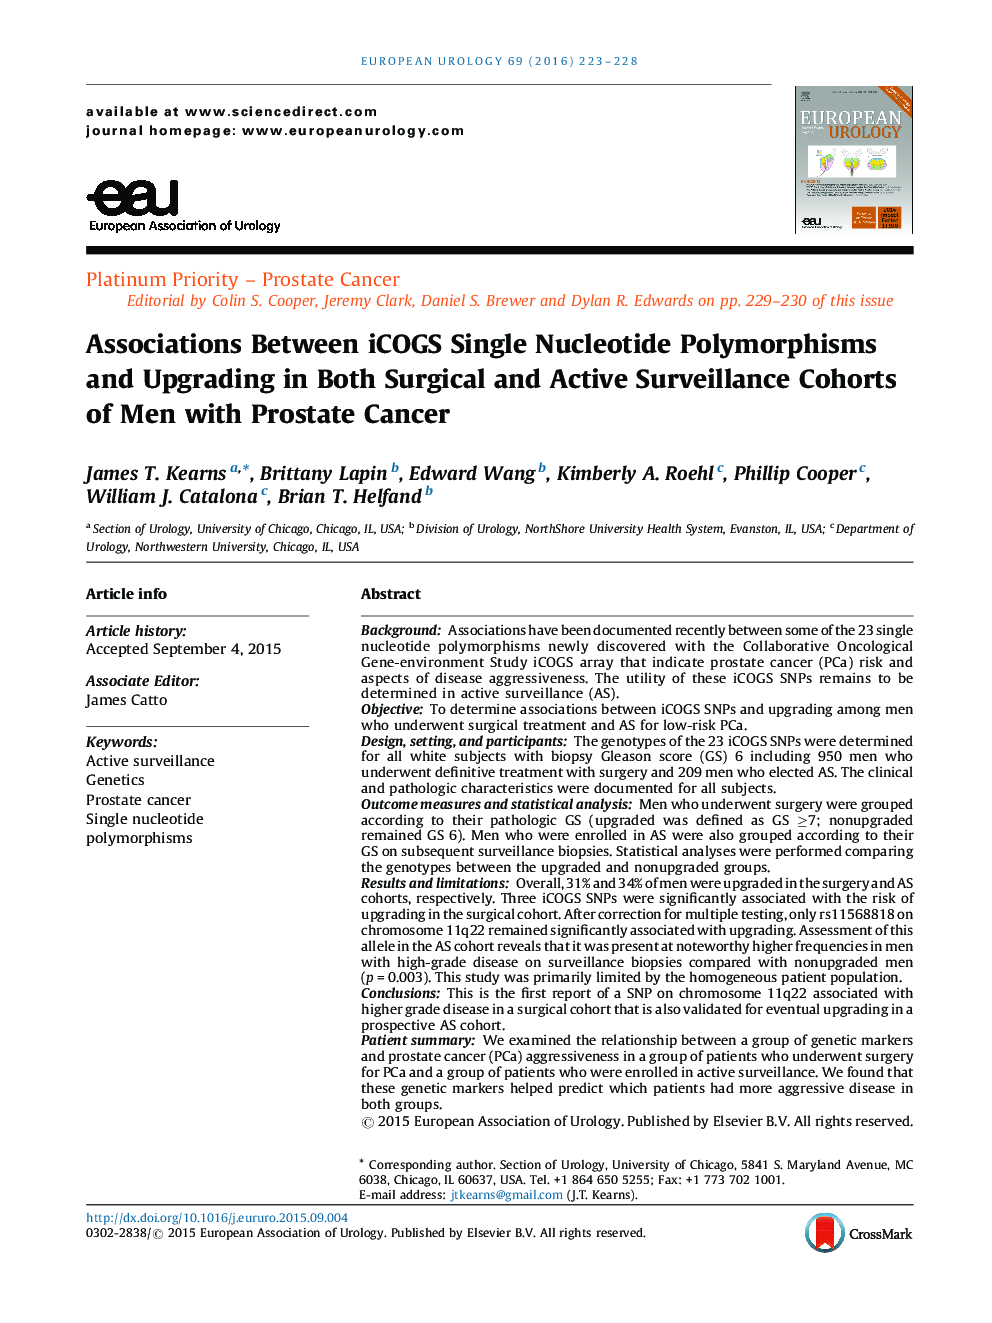 Associations Between iCOGS Single Nucleotide Polymorphisms and Upgrading in Both Surgical and Active Surveillance Cohorts of Men with Prostate Cancer